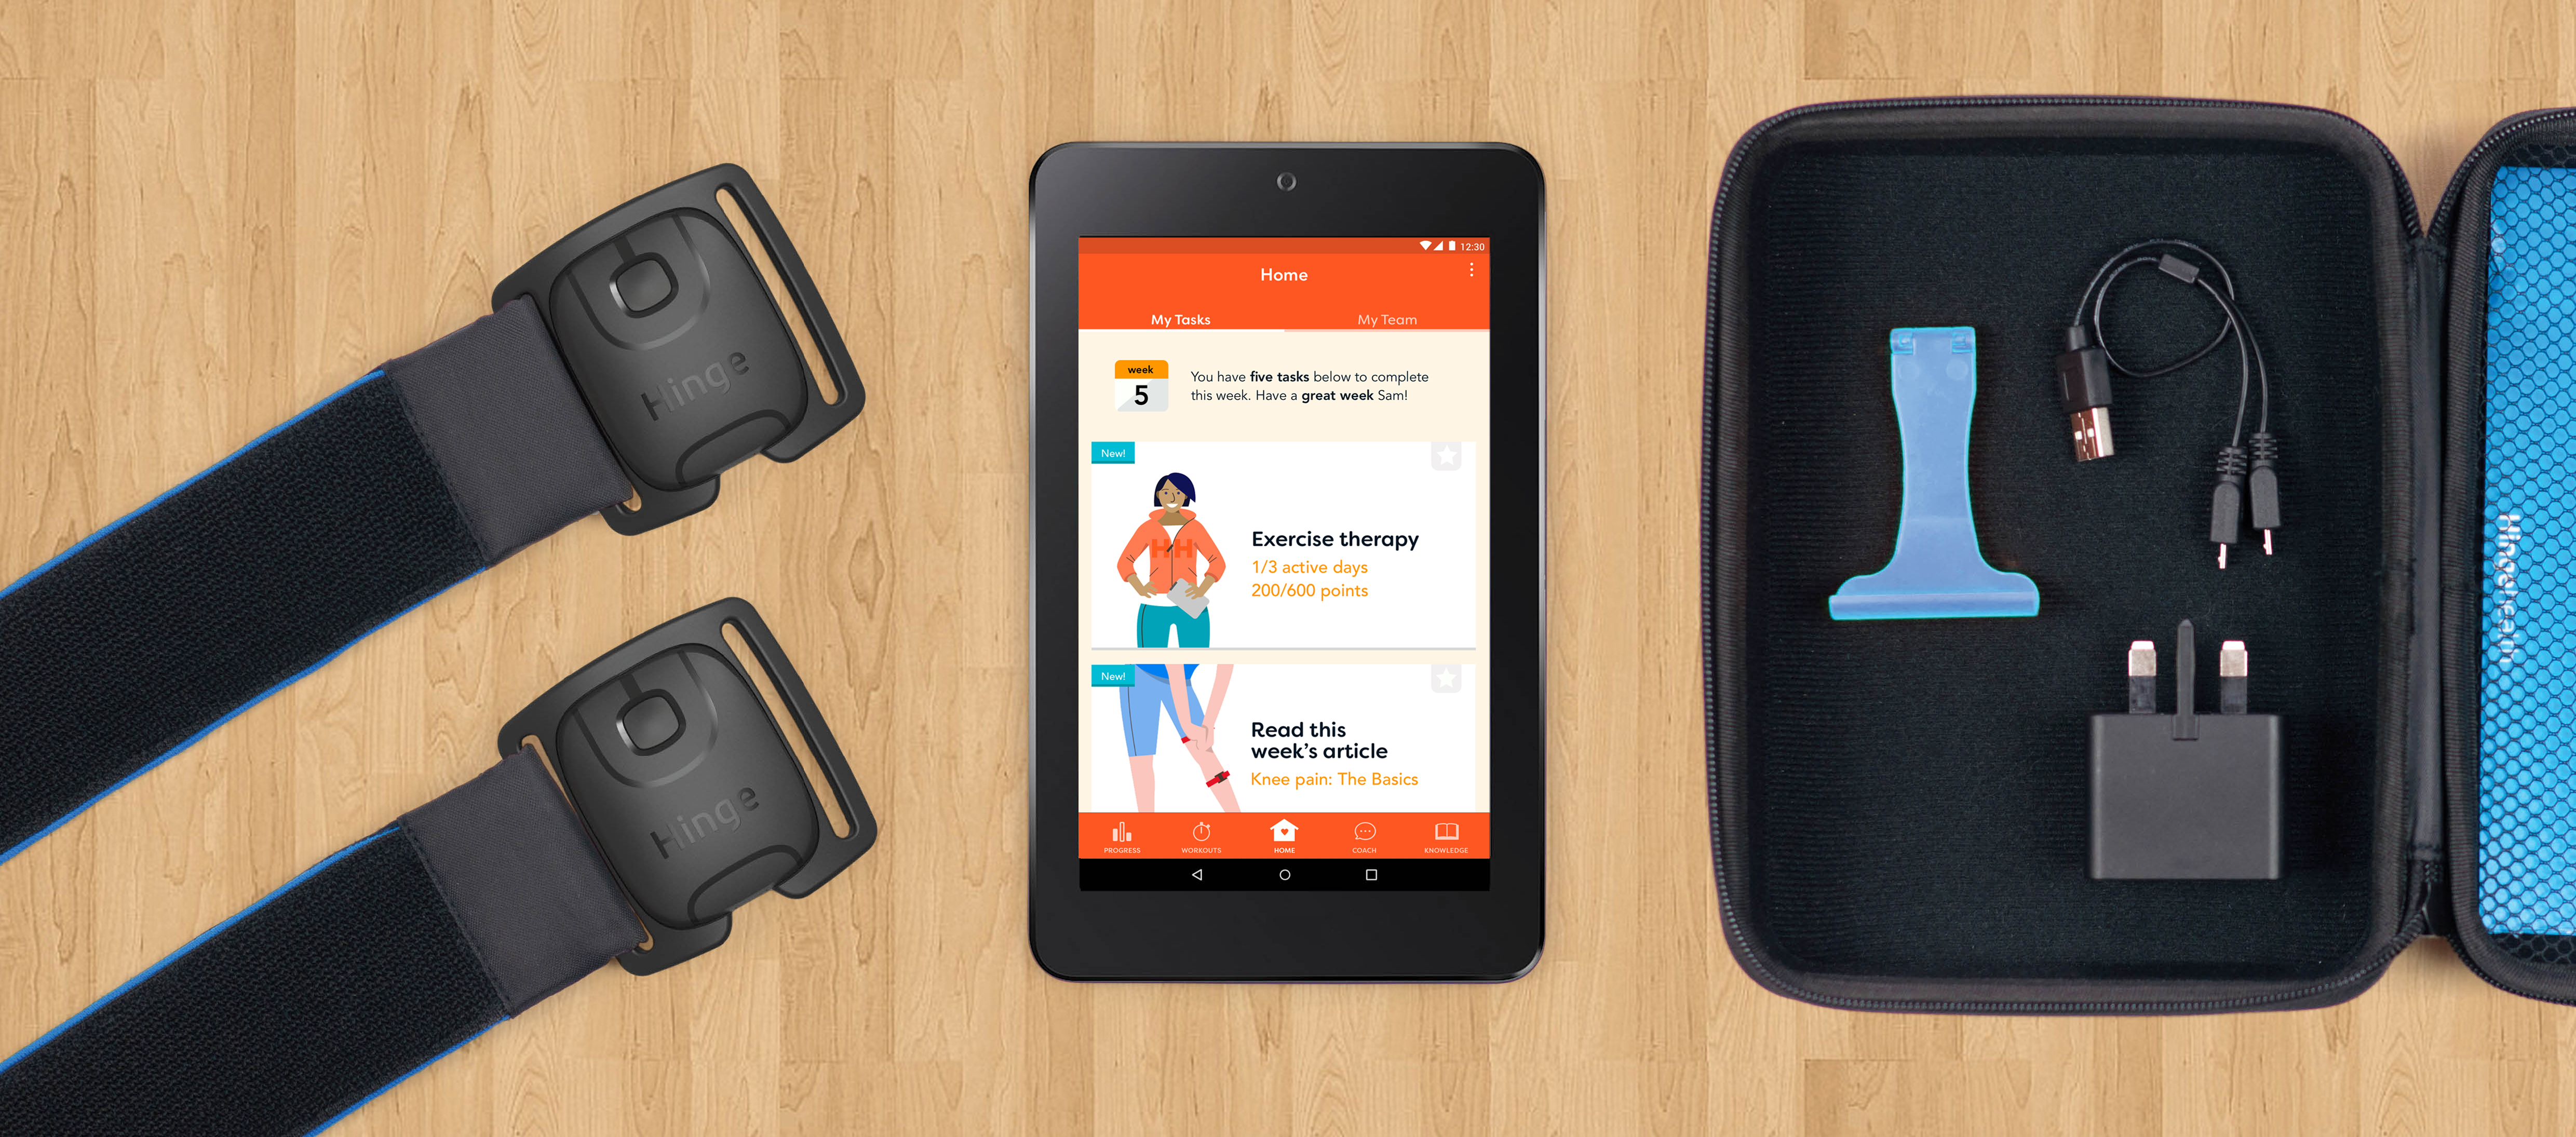 Hinge Health closes $8M Series A led by Atomico to ‘digitize delivery of healthcare’